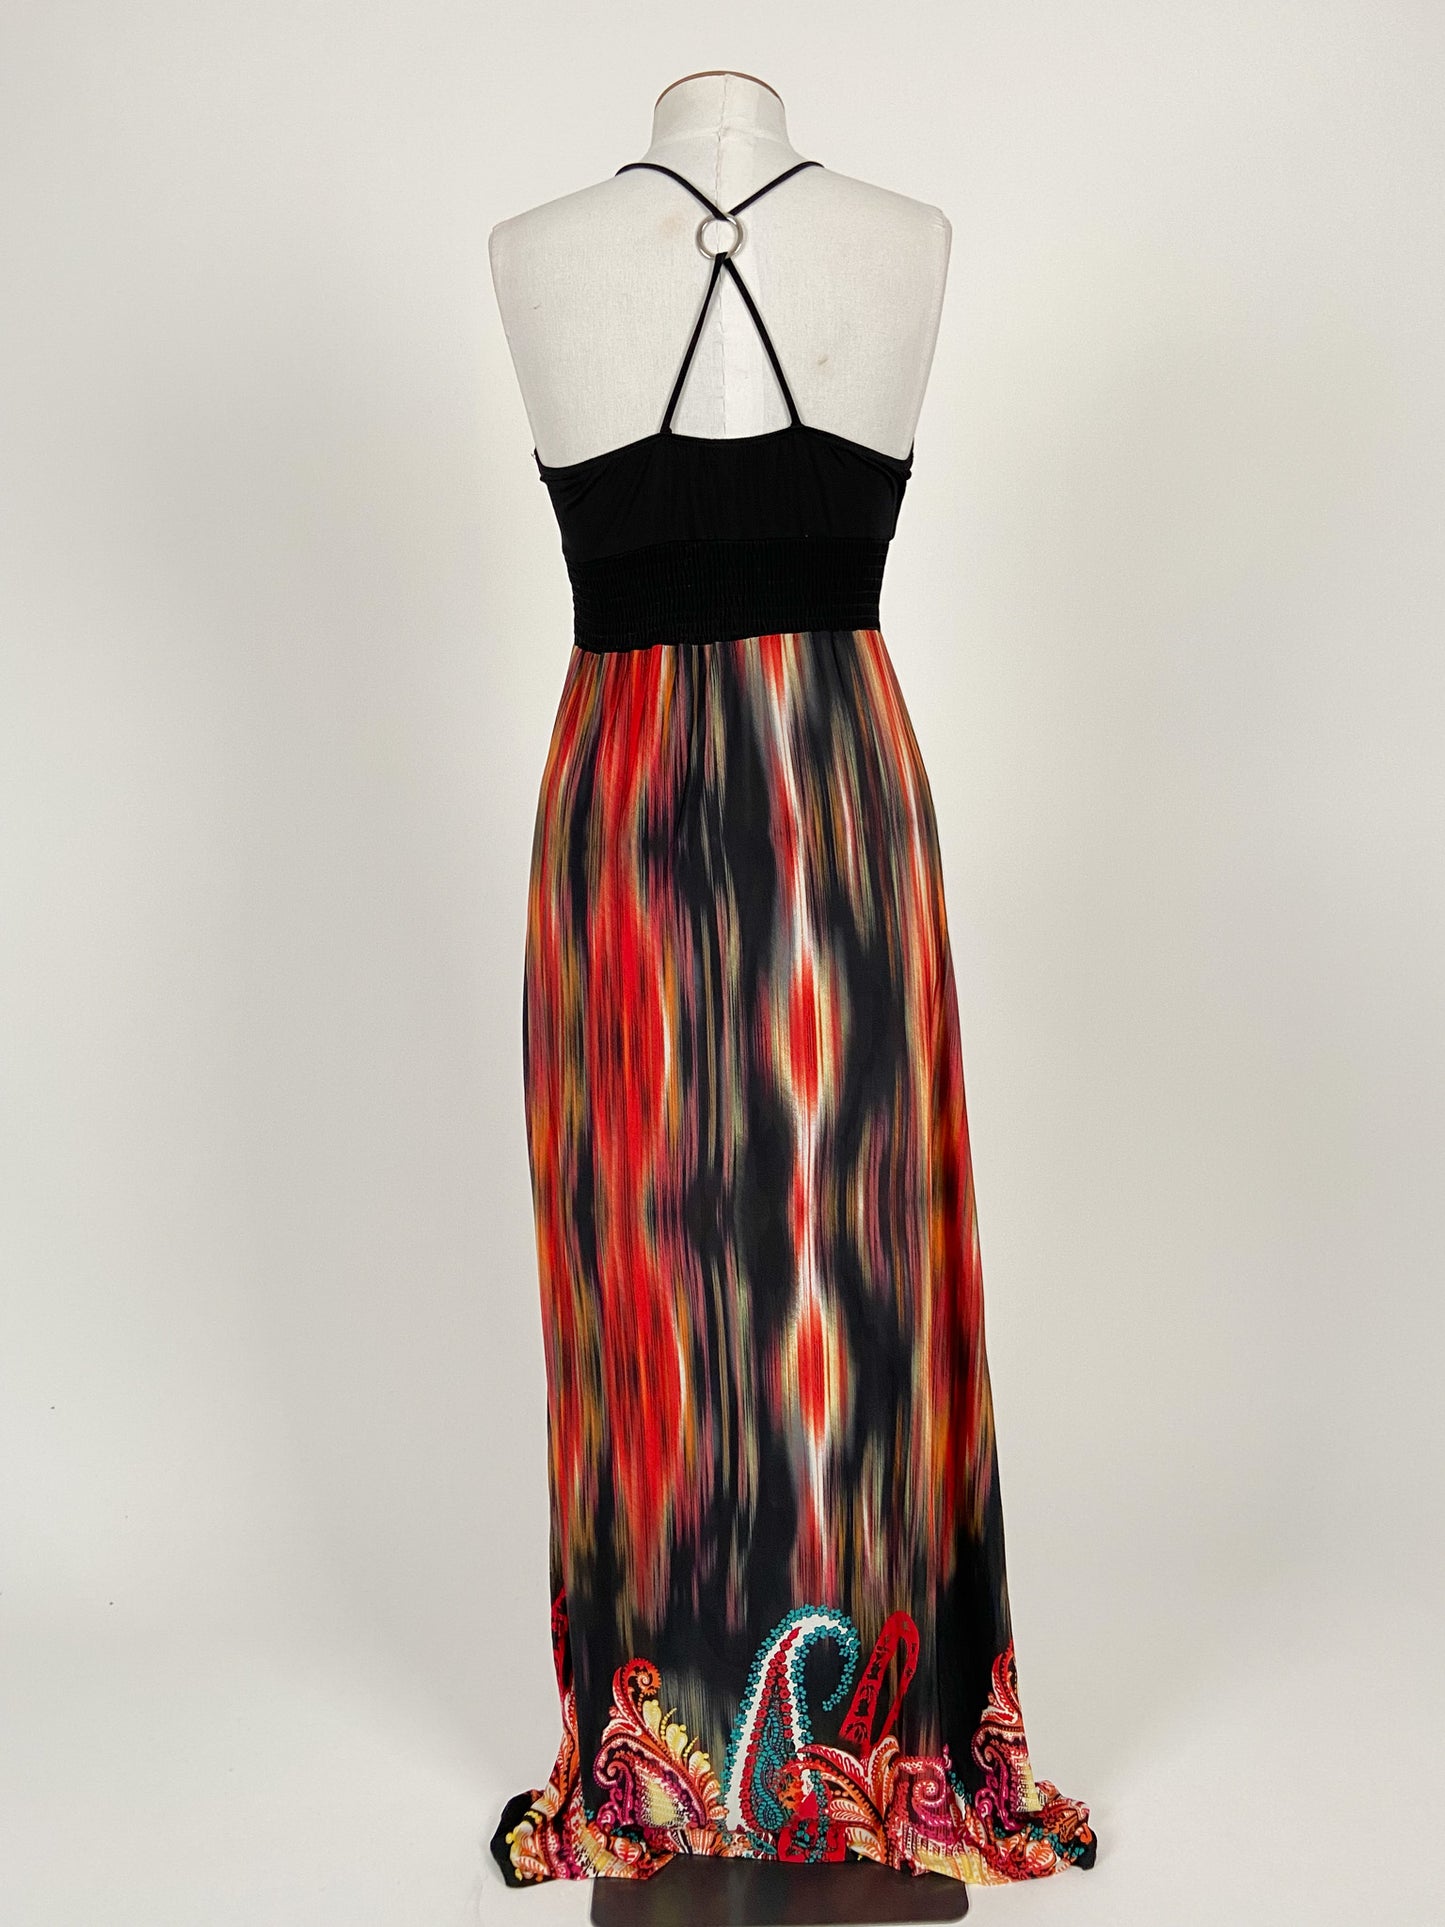 Suzy Shire | Multicoloured Cocktail/Formal Dress | Size M